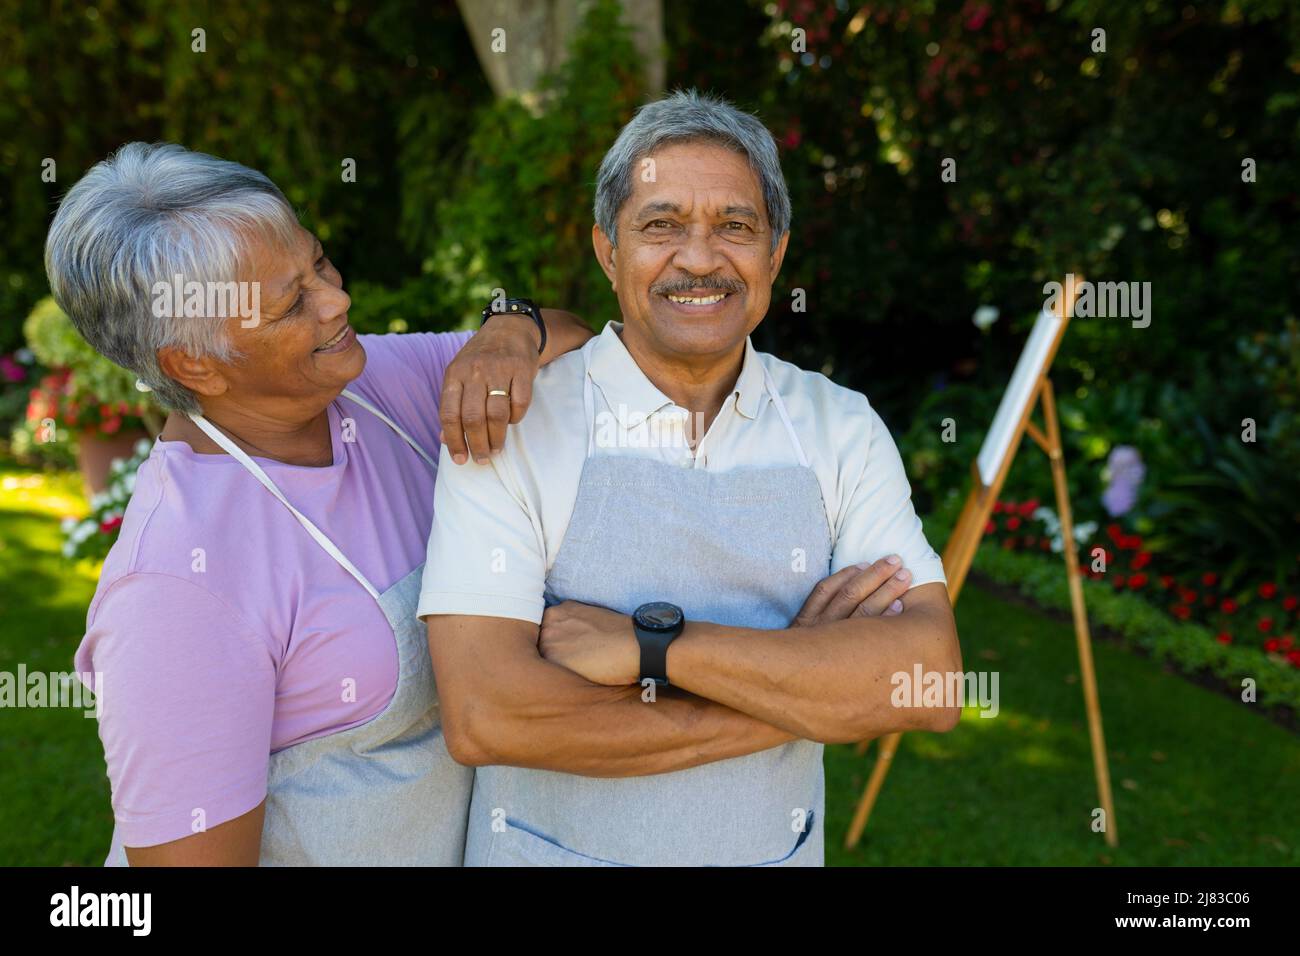 Smiling biracial senior woman with hand on husband's shoulder standing against plants in yard Stock Photo